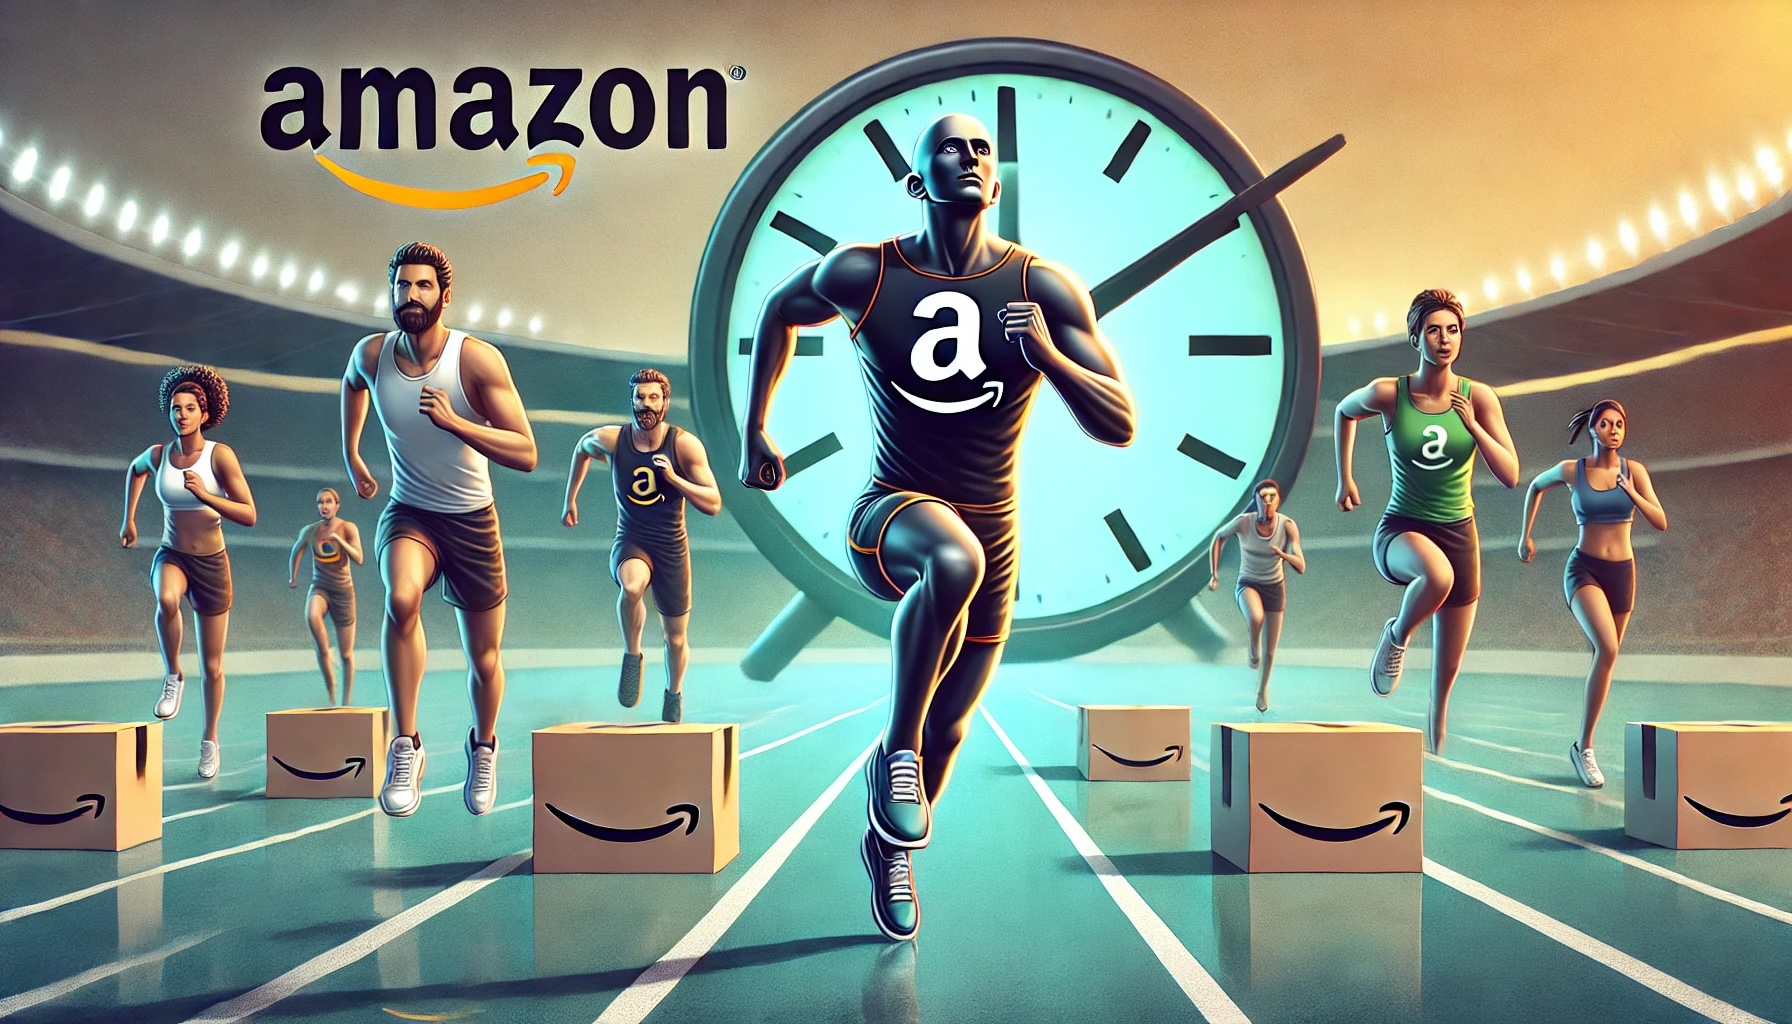 an Amazon seller finishing ahead of other sellers in a running race with a clock ticking in the background